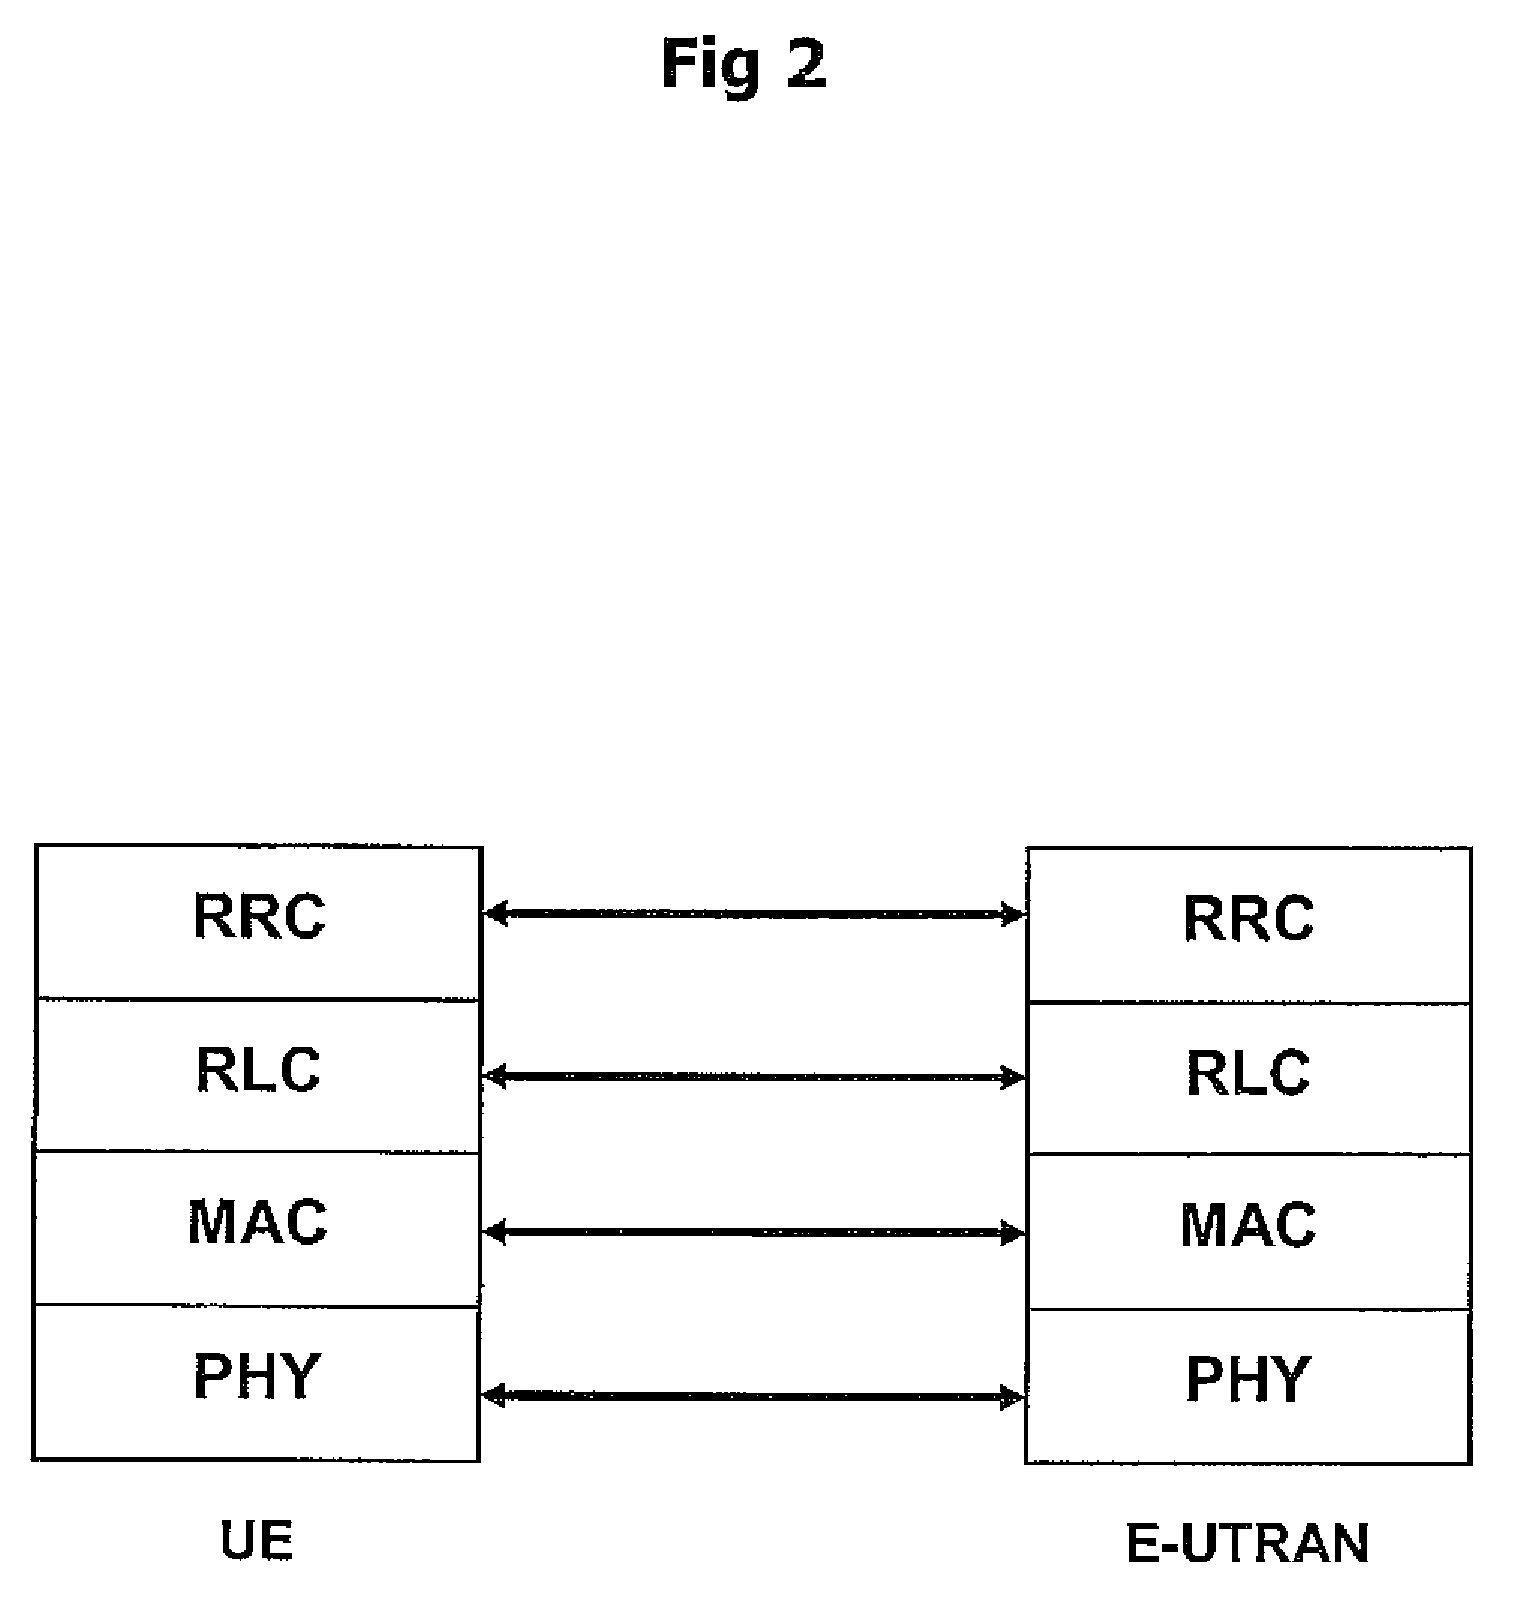 Method of an uplink HARQ operation at an expiry of time alignment timer